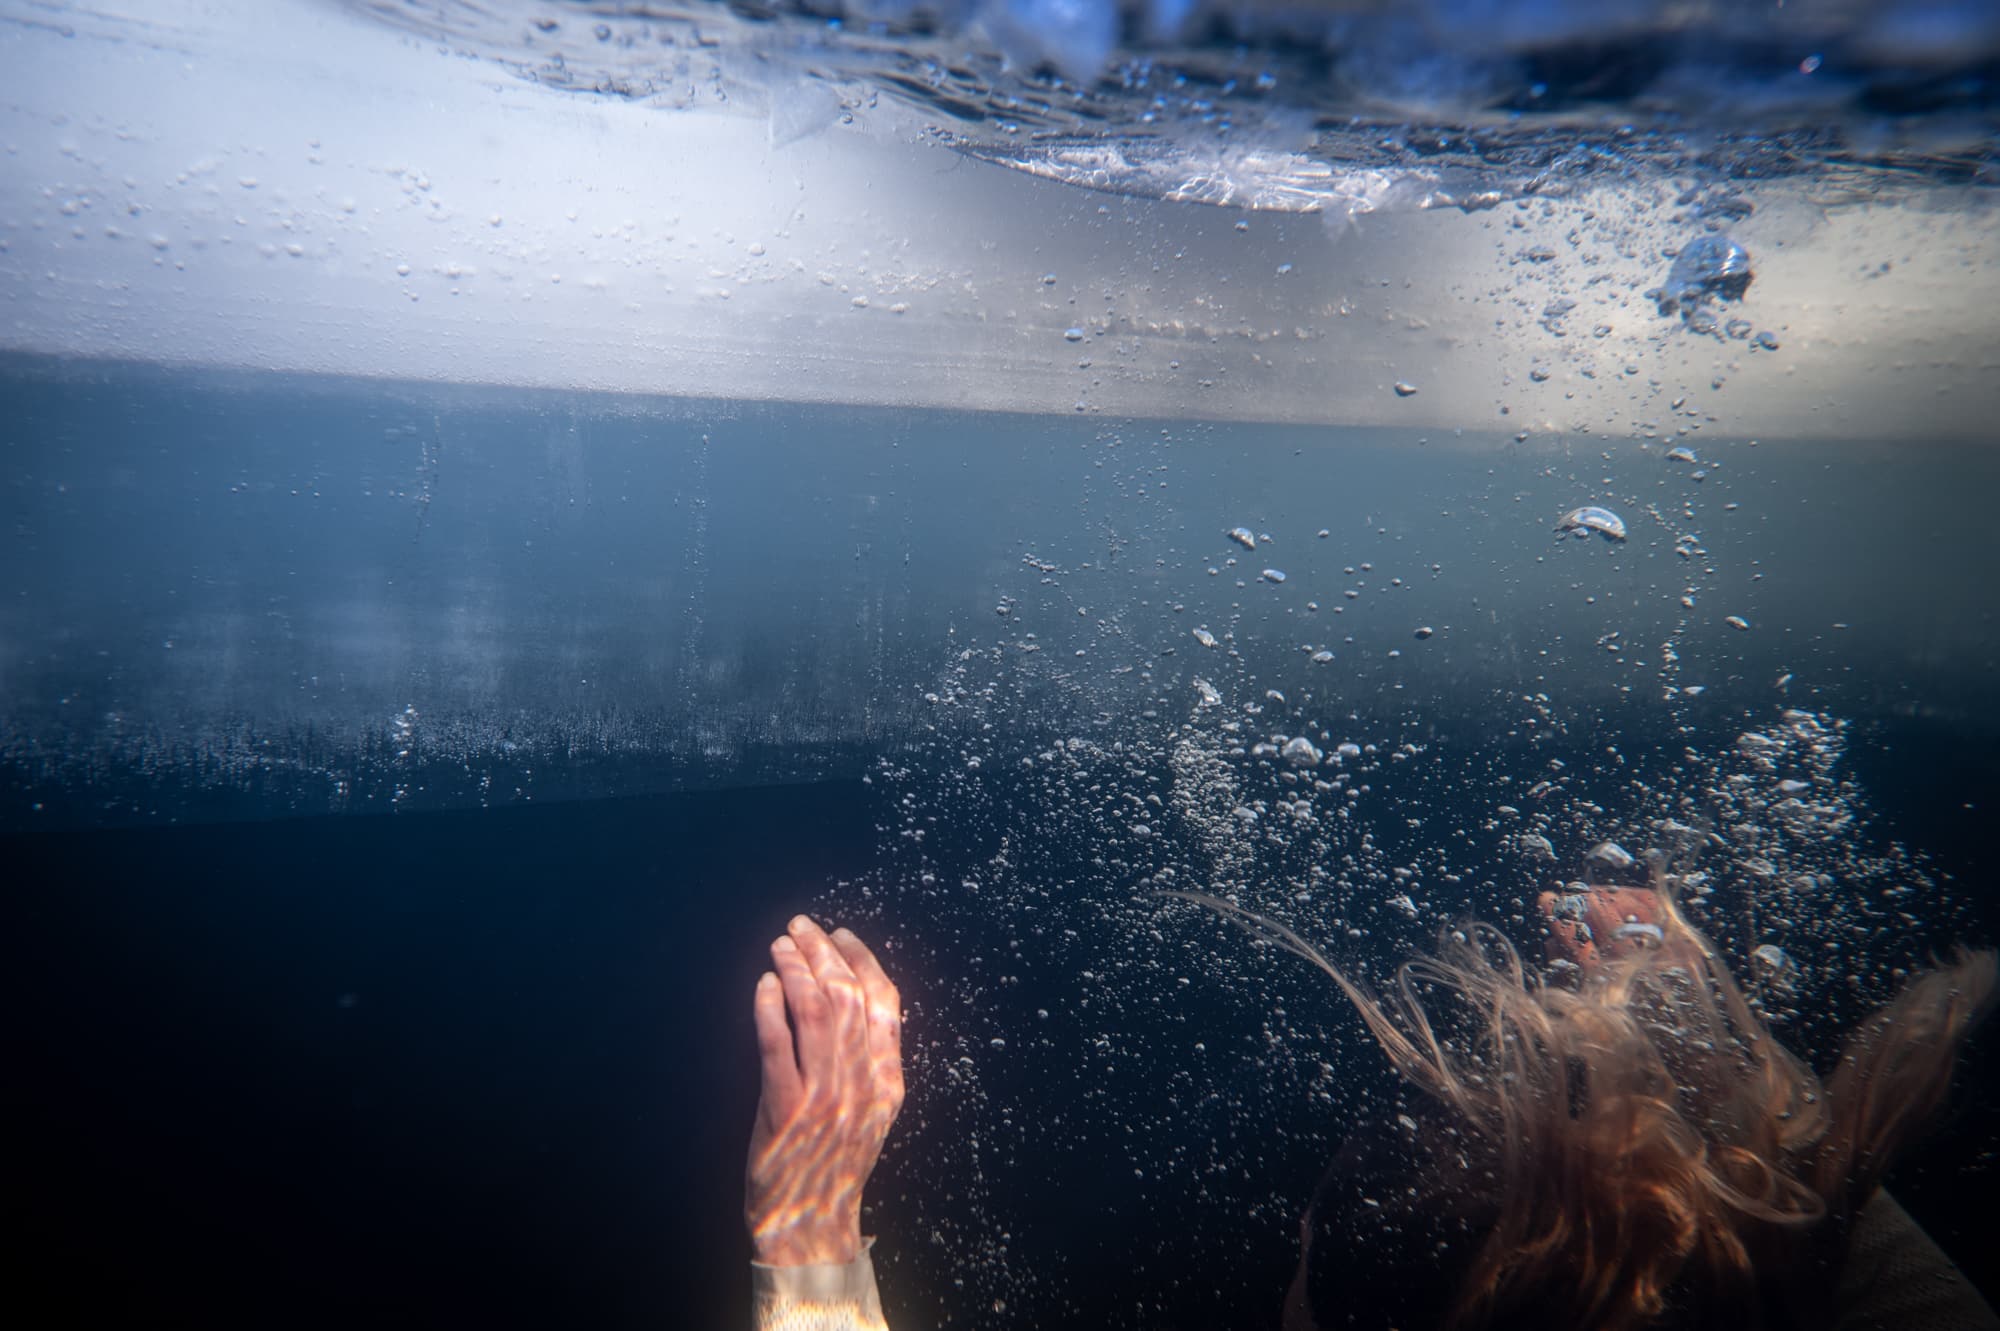 Story on South African freediver Amber Fillary trying to break the Guinness world record on March 21st, 2019, for diving 60 m under solid ice in nothing but a bikini.